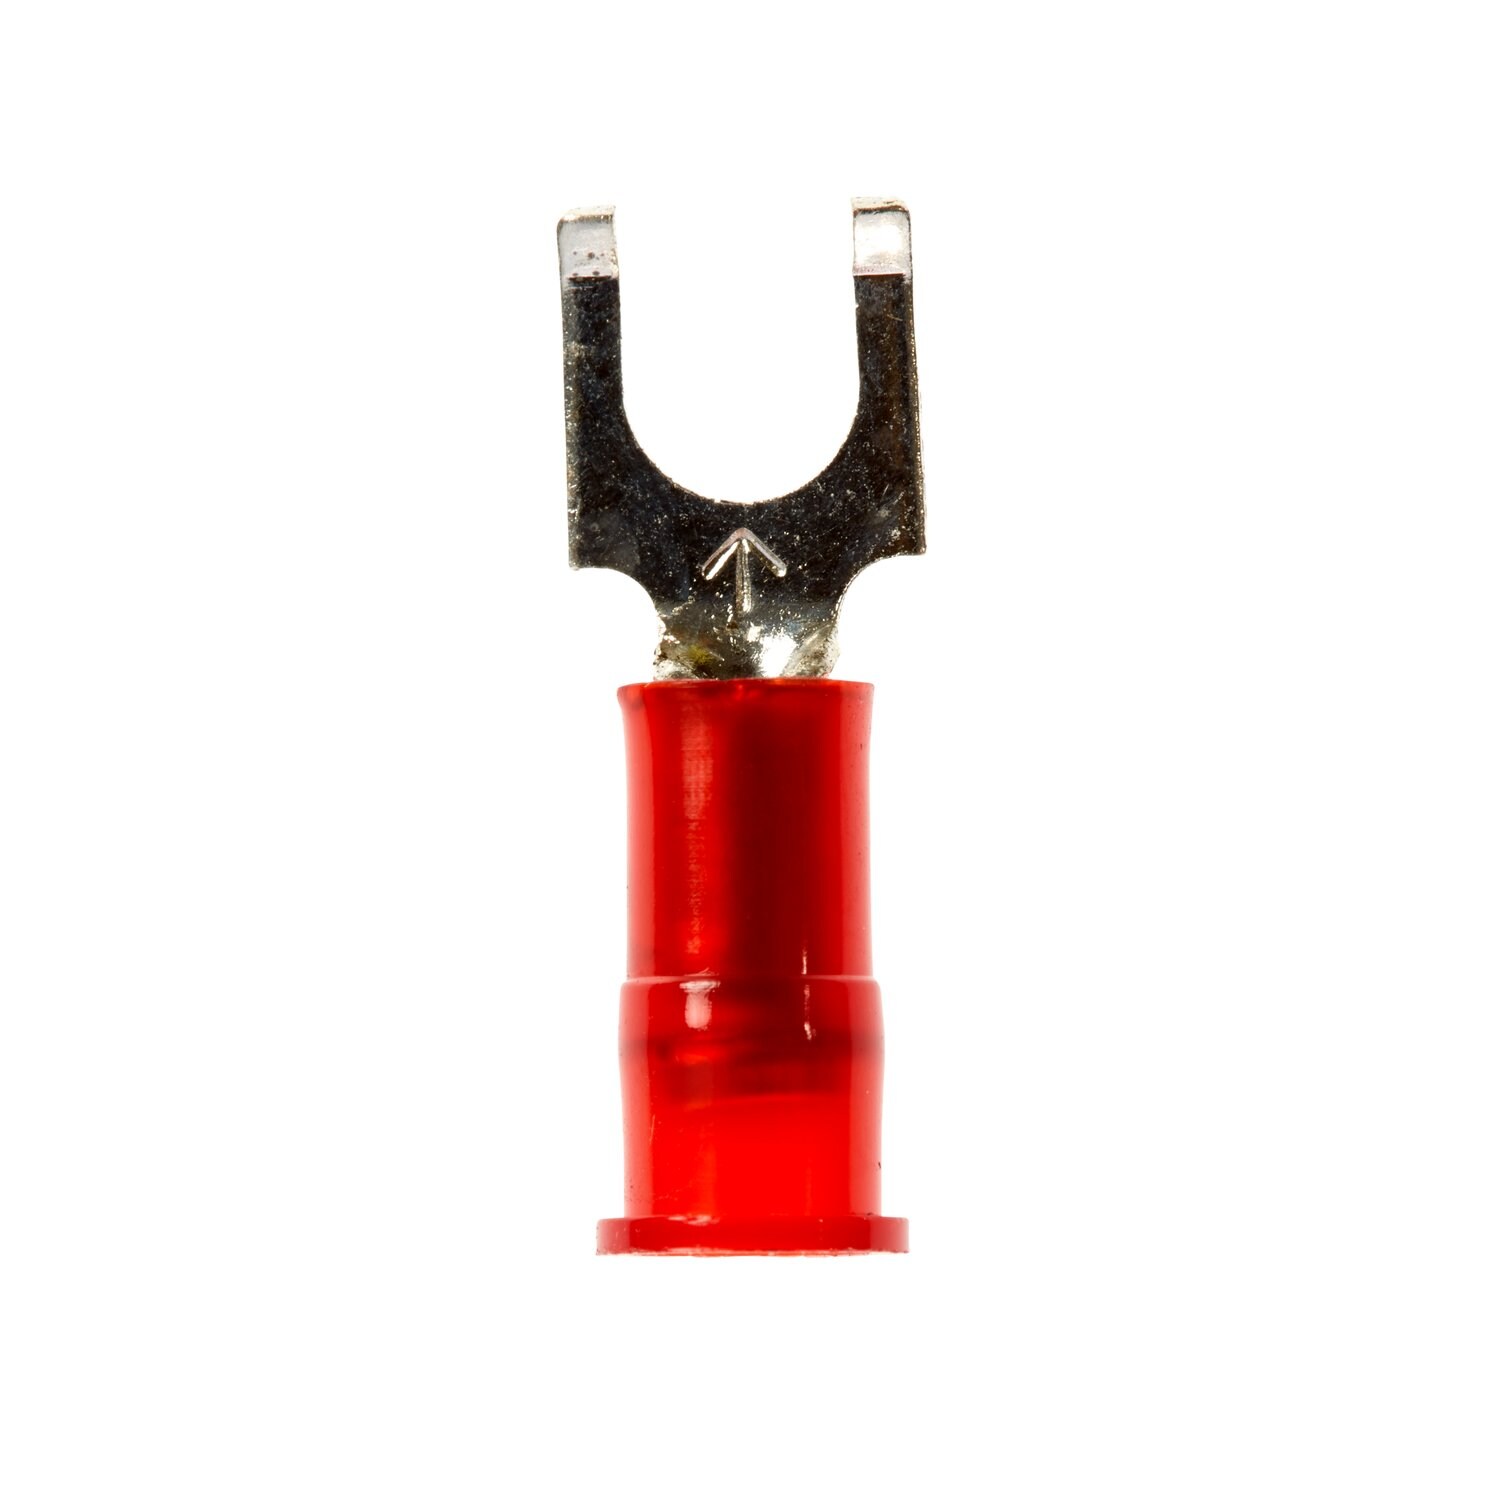 7100165303 - 3M Scotchlok Flanged Block Fork Nylon Insulated, 100/bottle,
MNG18-10FFBX, suitable for use in a terminal block, 500/Case